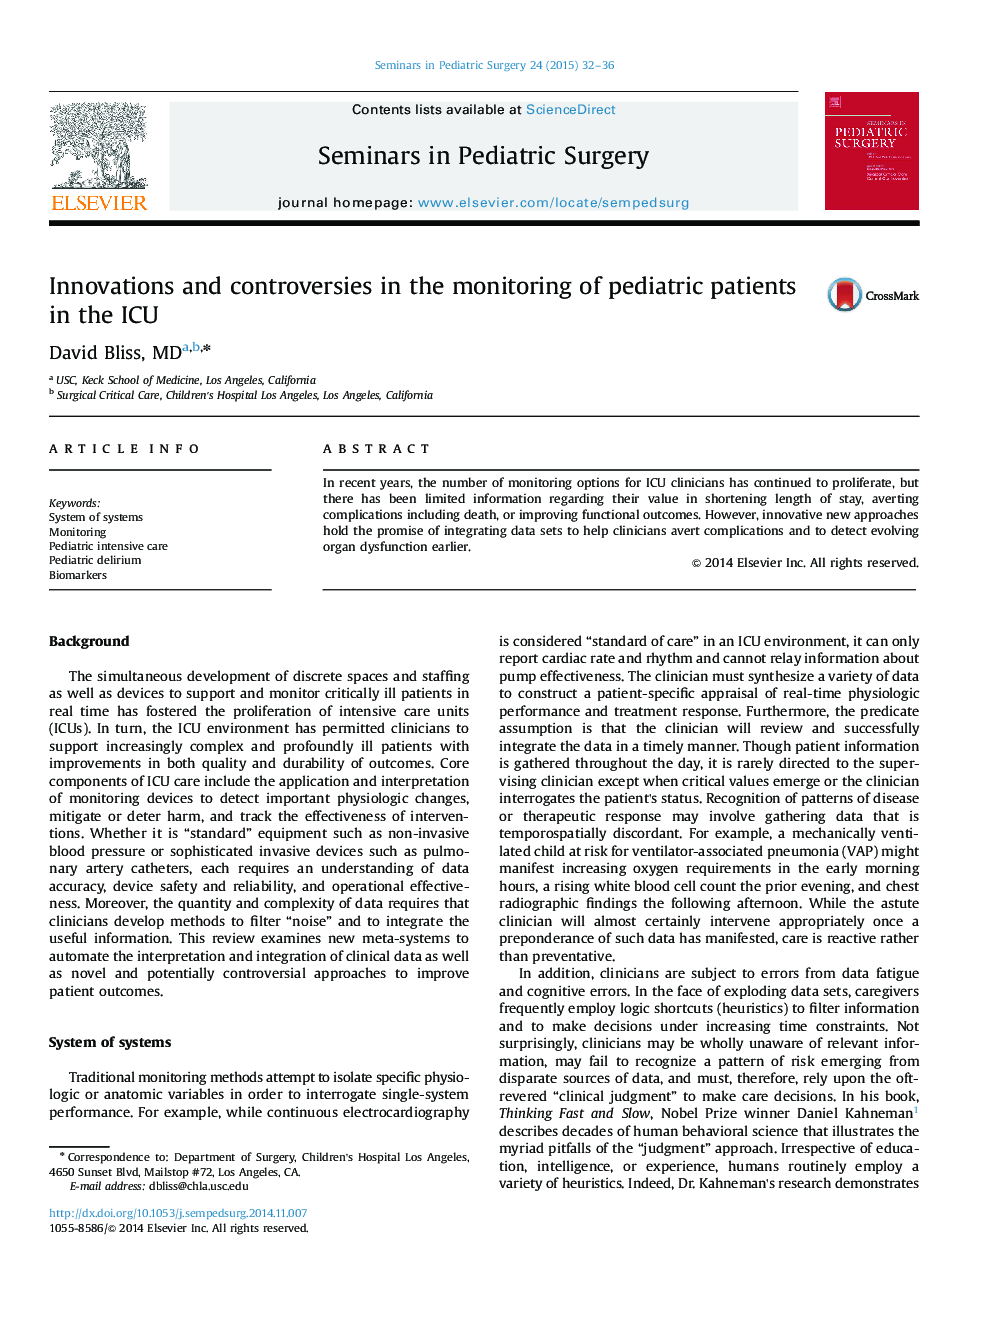 Innovations and controversies in the monitoring of pediatric patients in the ICU